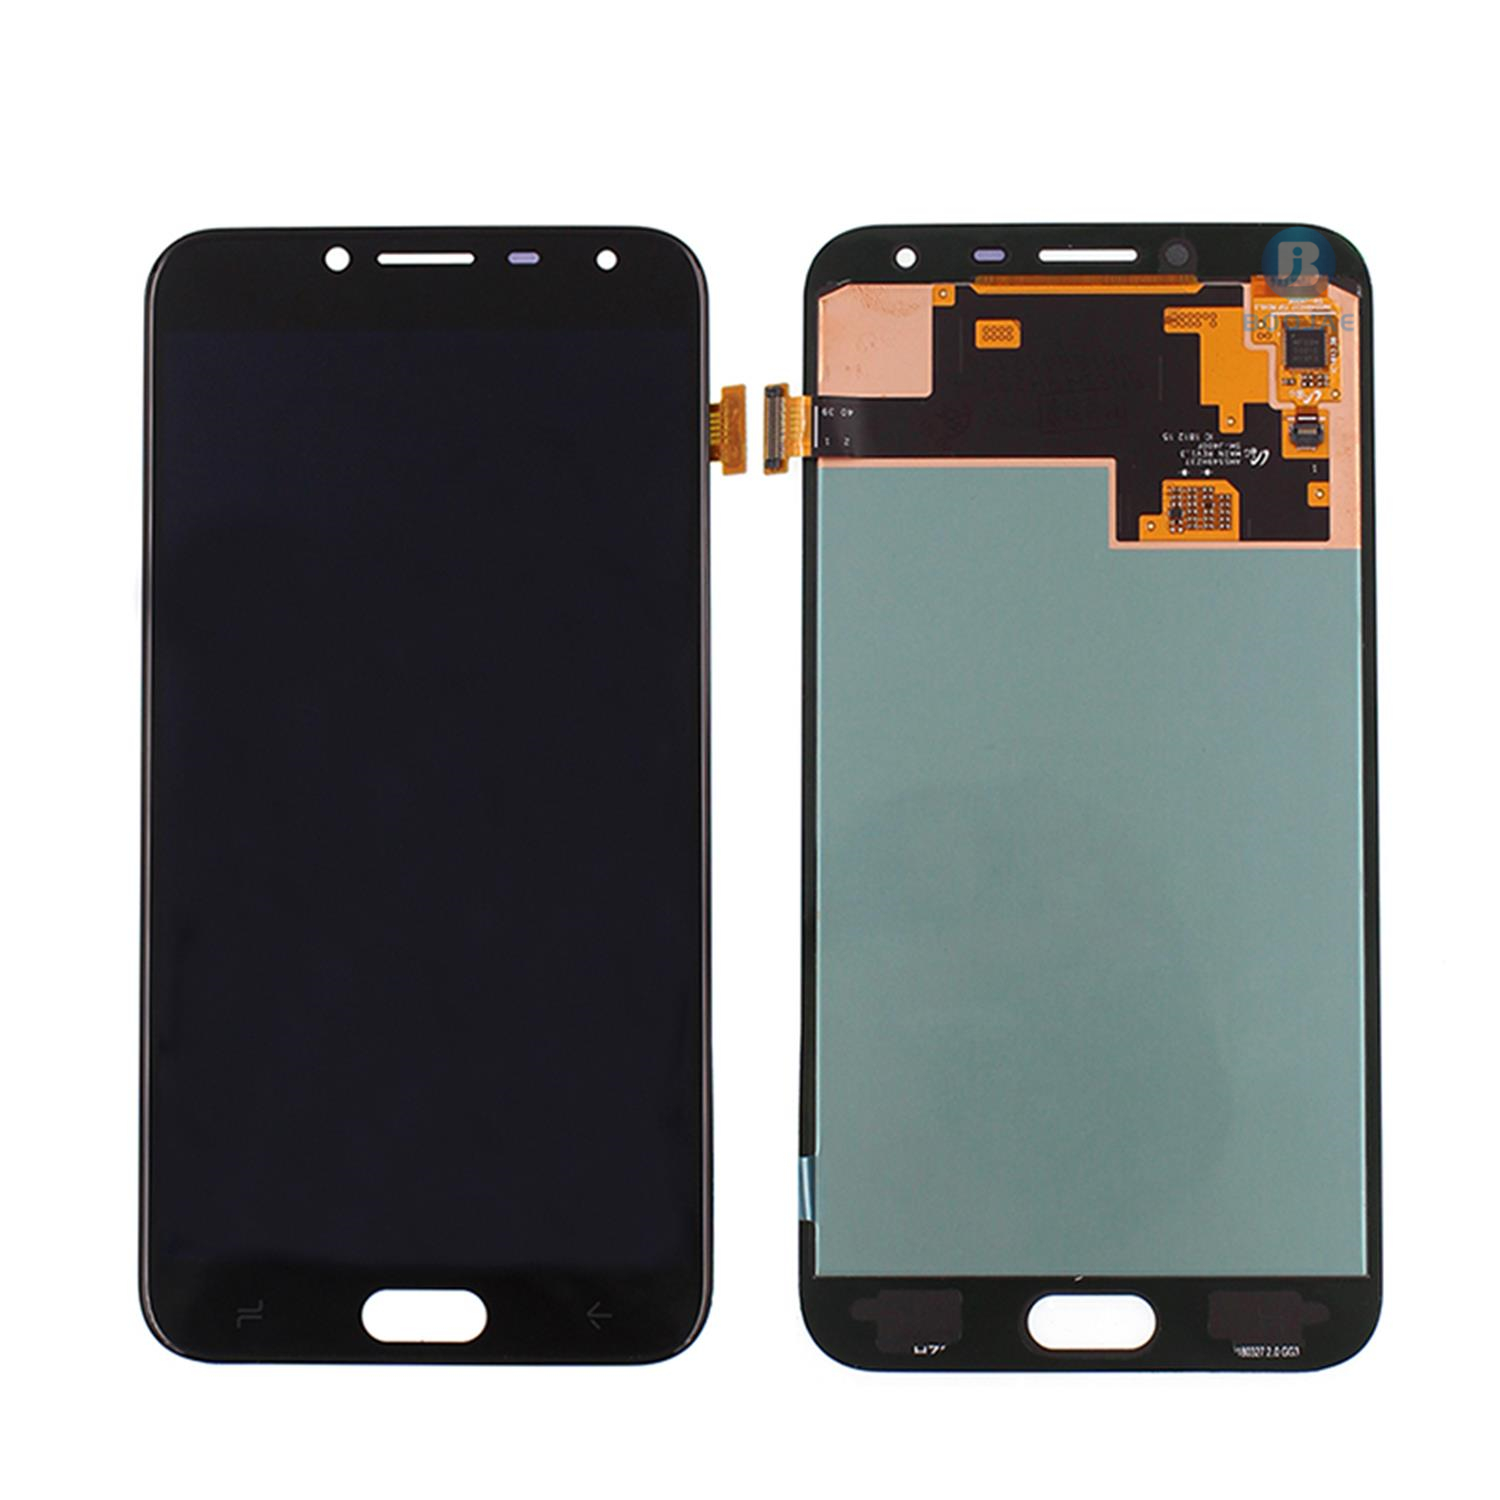 Samsung Galaxy J4 2018 J400 LCD Screen Display and Touch Panel Digitizer Assembly Replacement